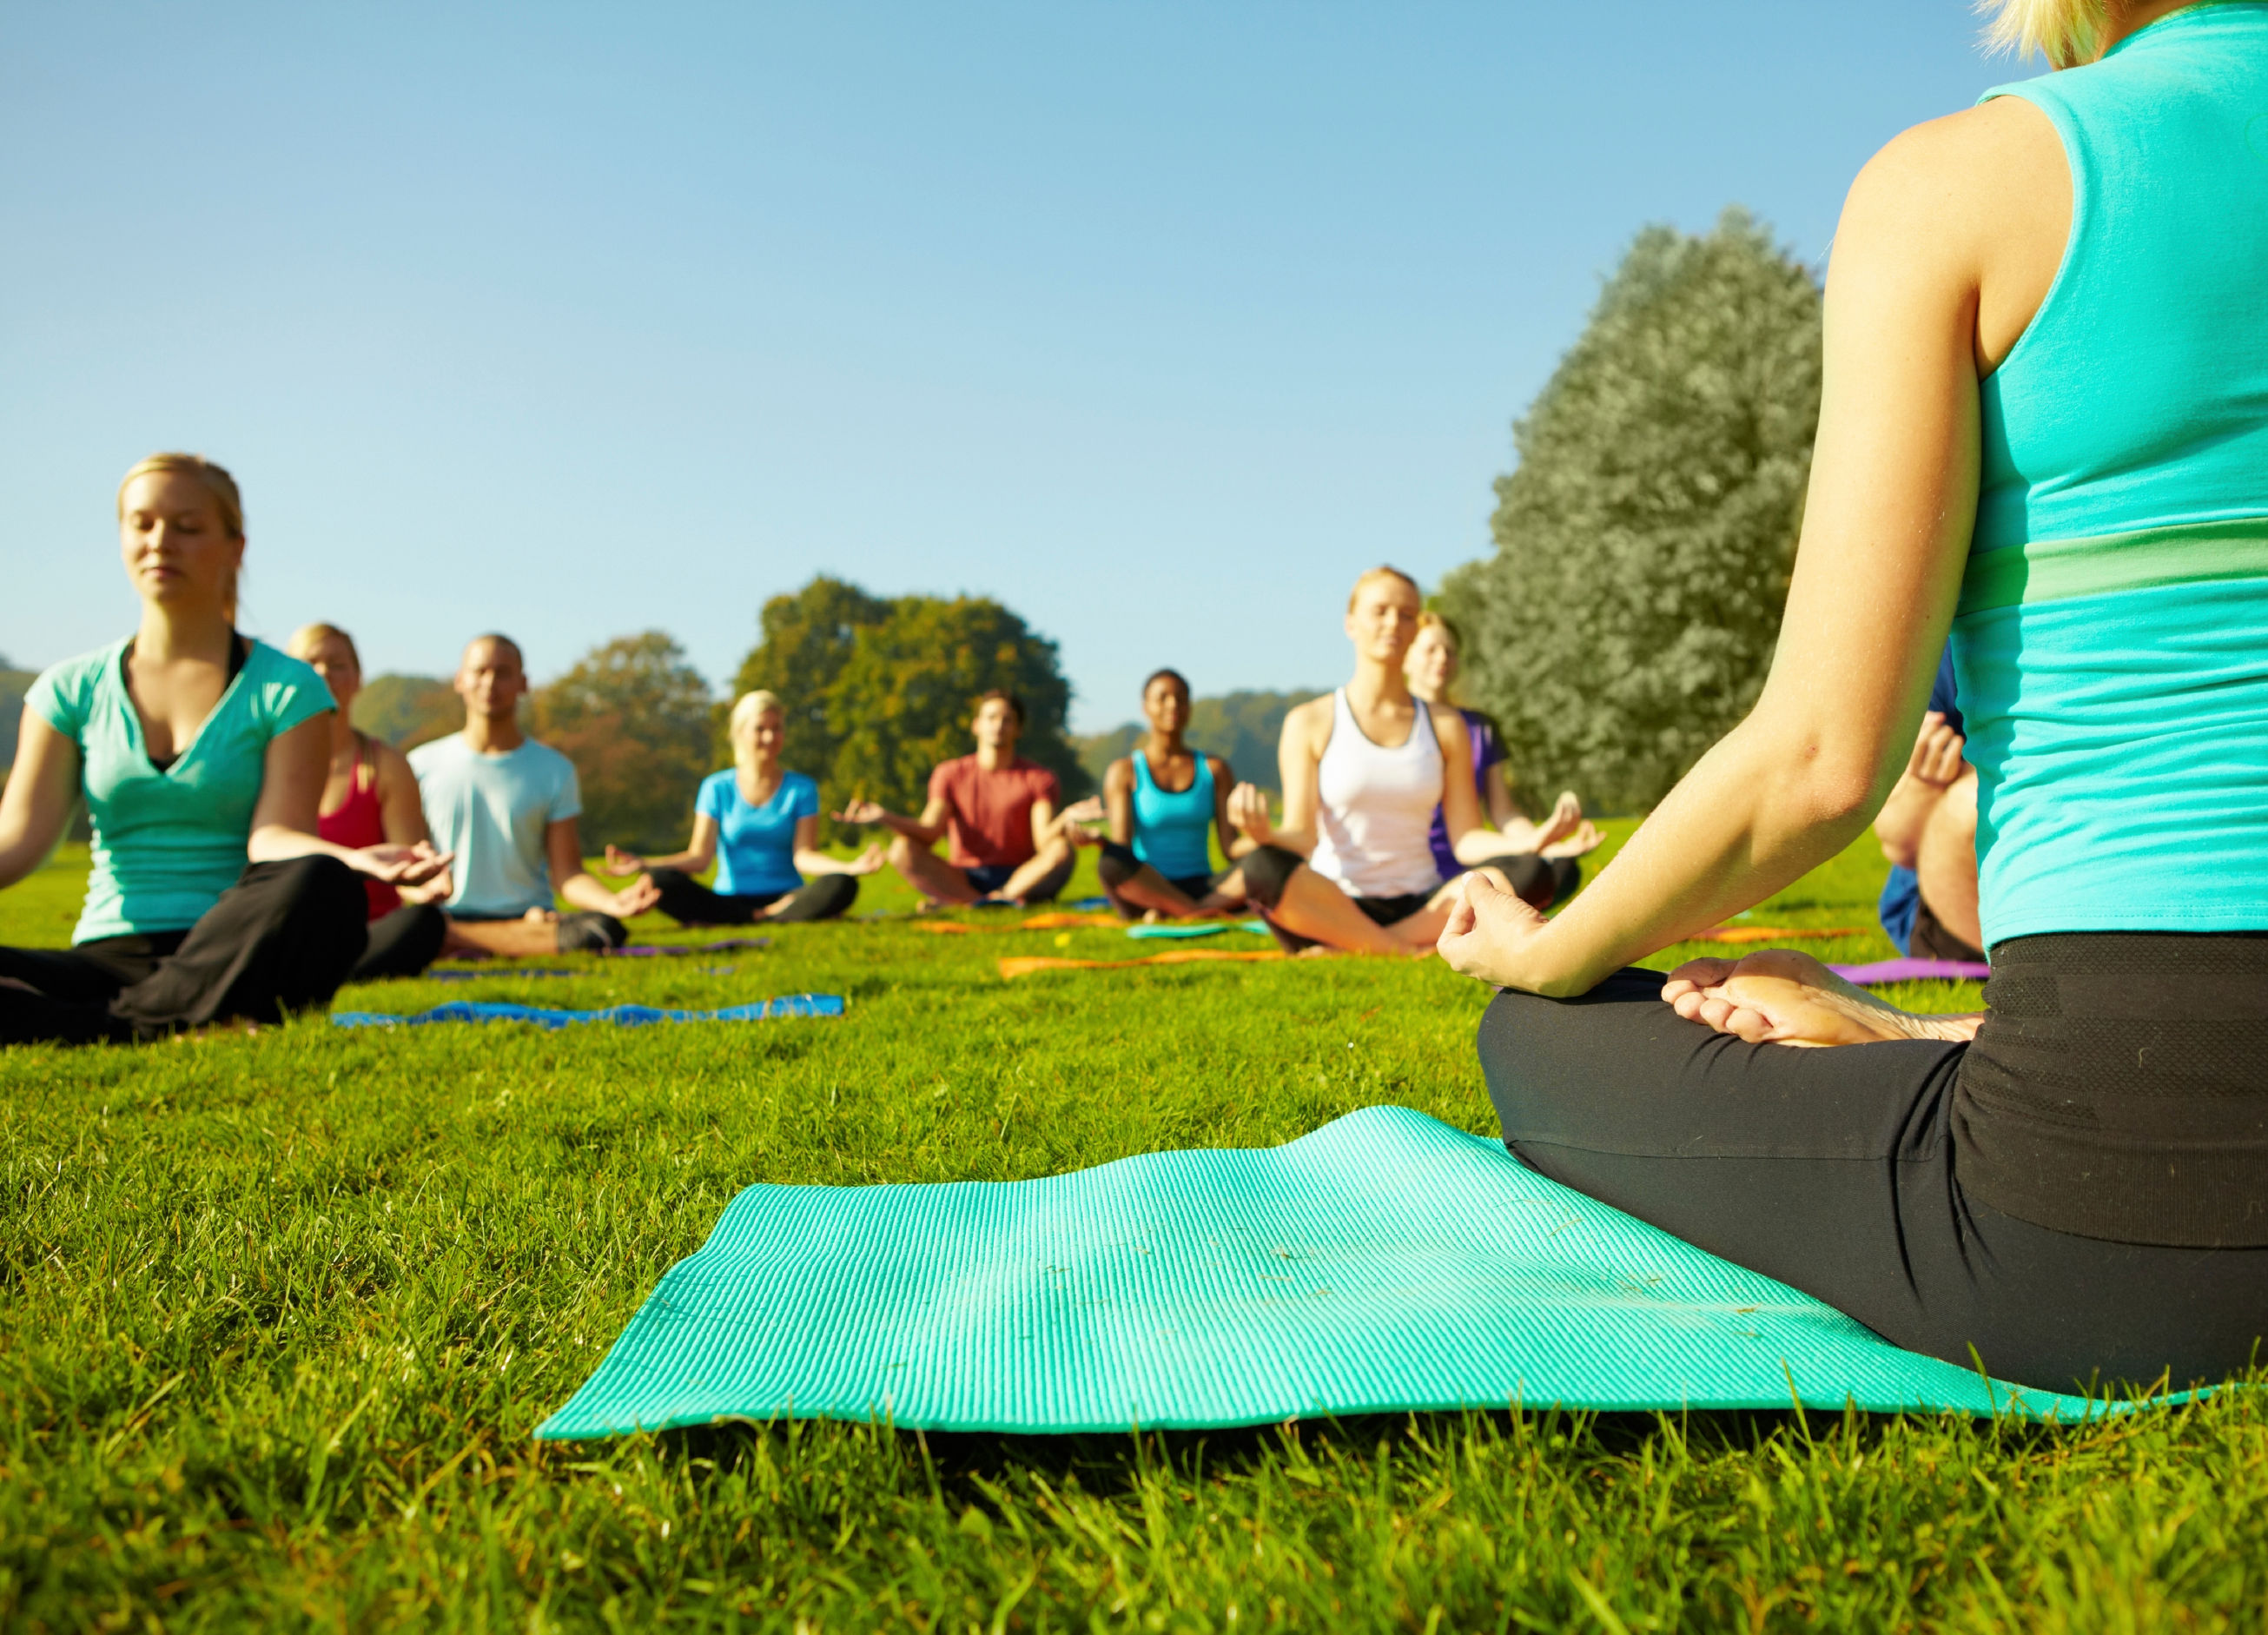 Ground view of a group of people attending a yoga class outdoors